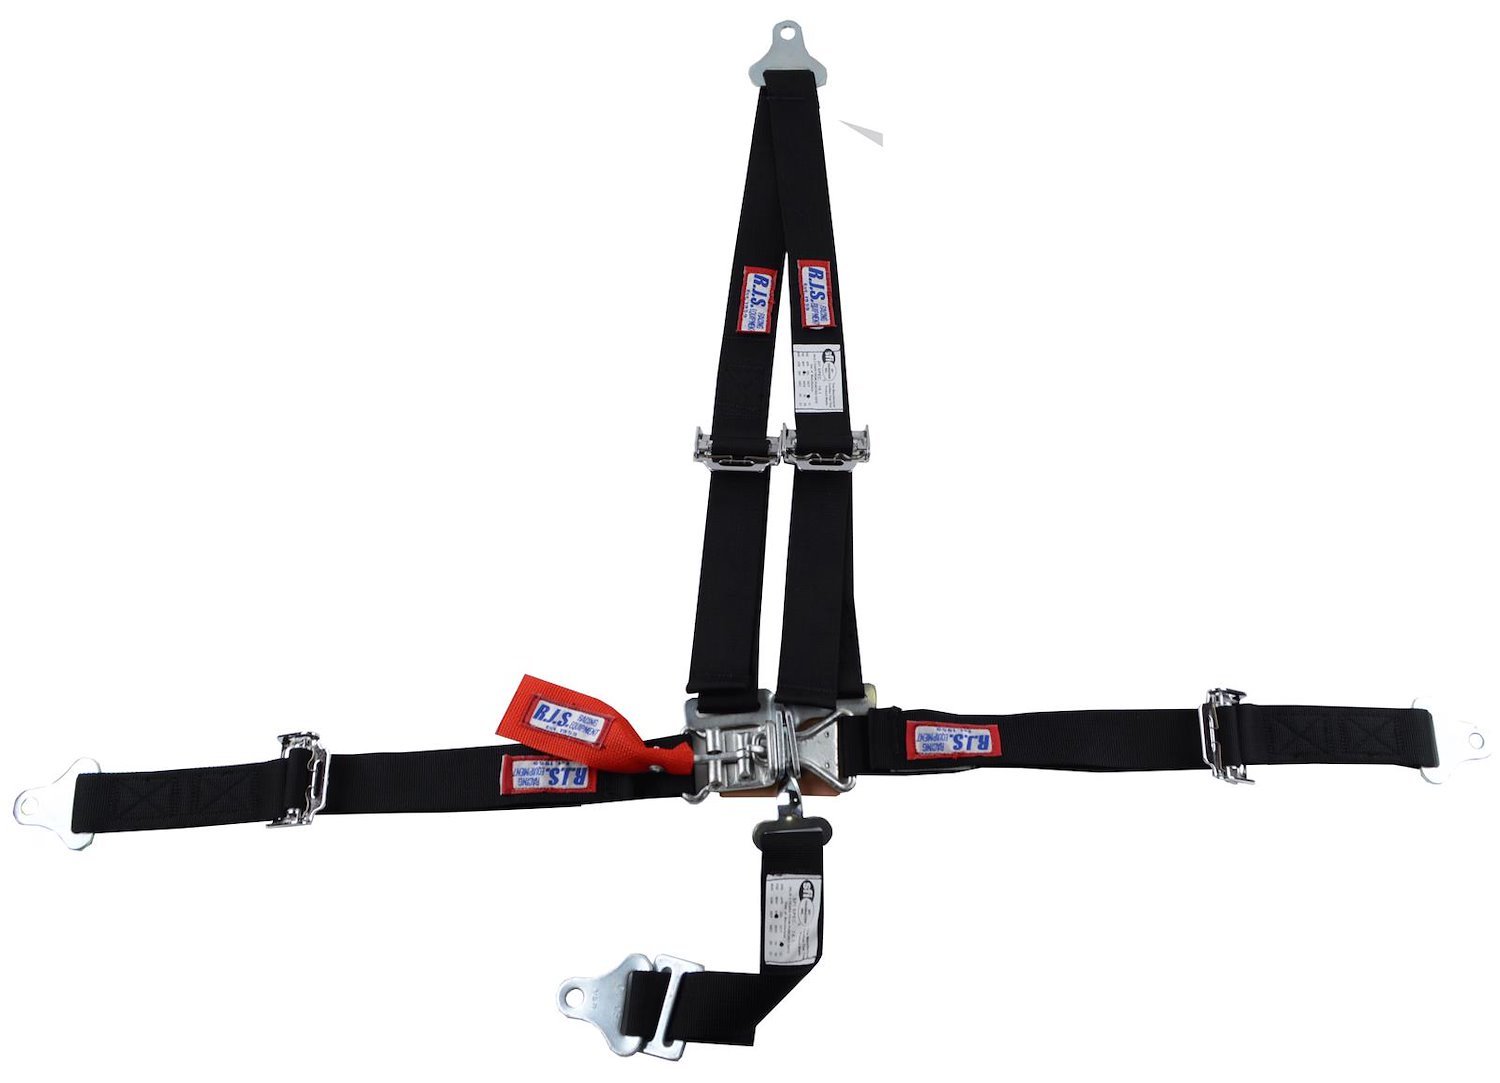 SFI 16.1 L&L HARNESS 2 PULL UP Lap Belt 2 Shoulder Harness Individual FLOOR Mount 2 DOUBLE Sub ALL WRAP ENDS w/STERNUM STRAP RED